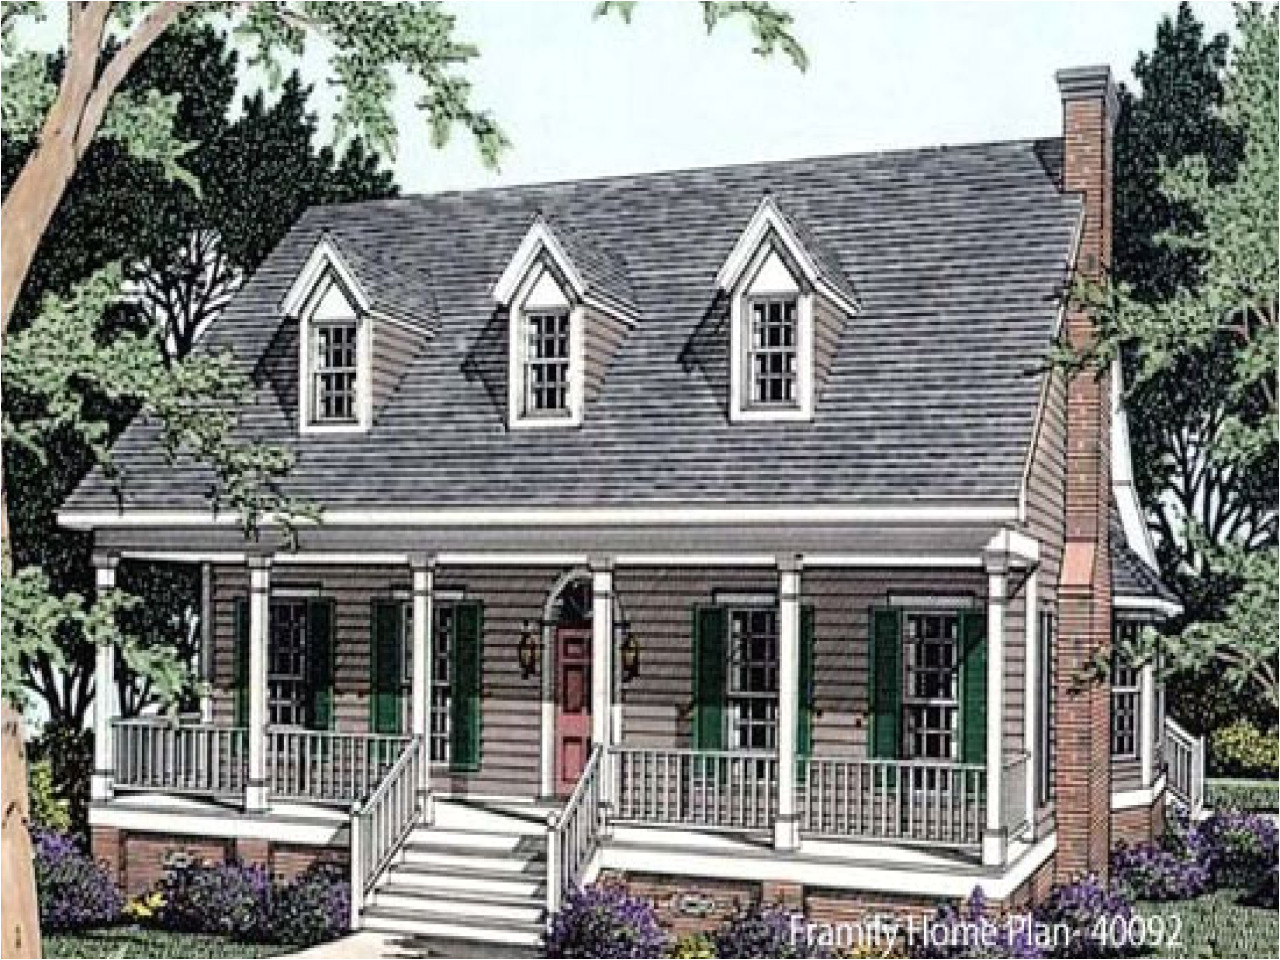 House Plans with A Front Porch House Plans One Story with Porches One Floor House Plans